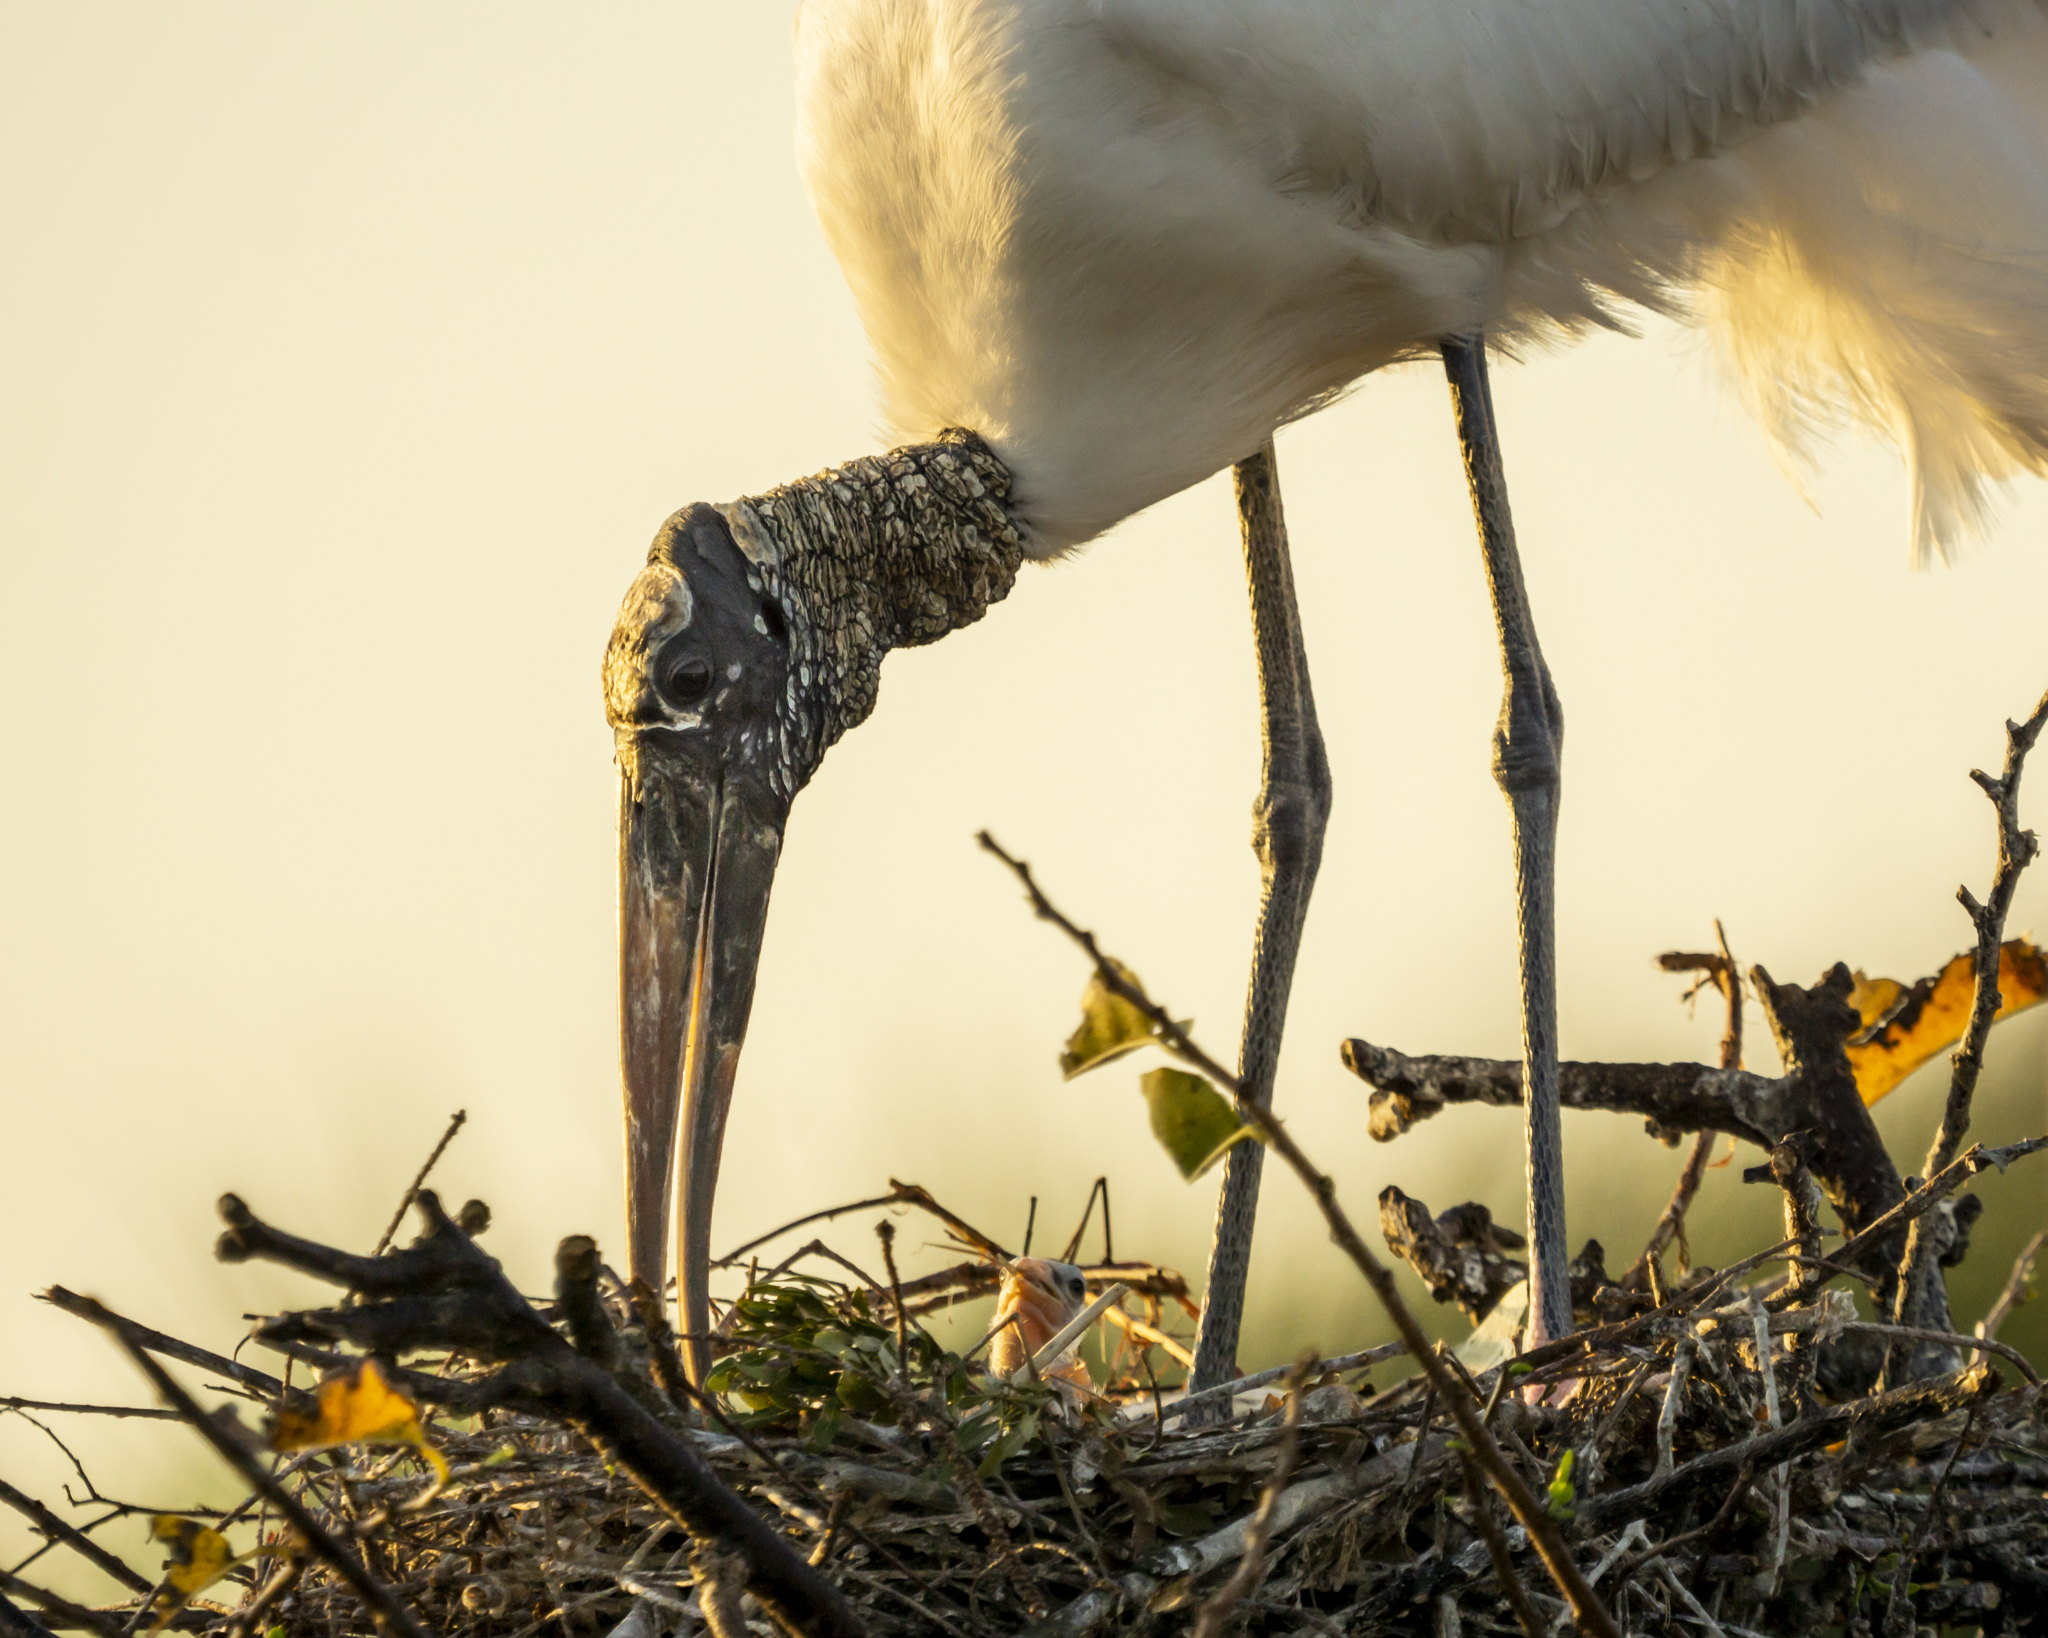 A Wood Stork stands above its nest. The viewer can see the head of a tiny stork chick.